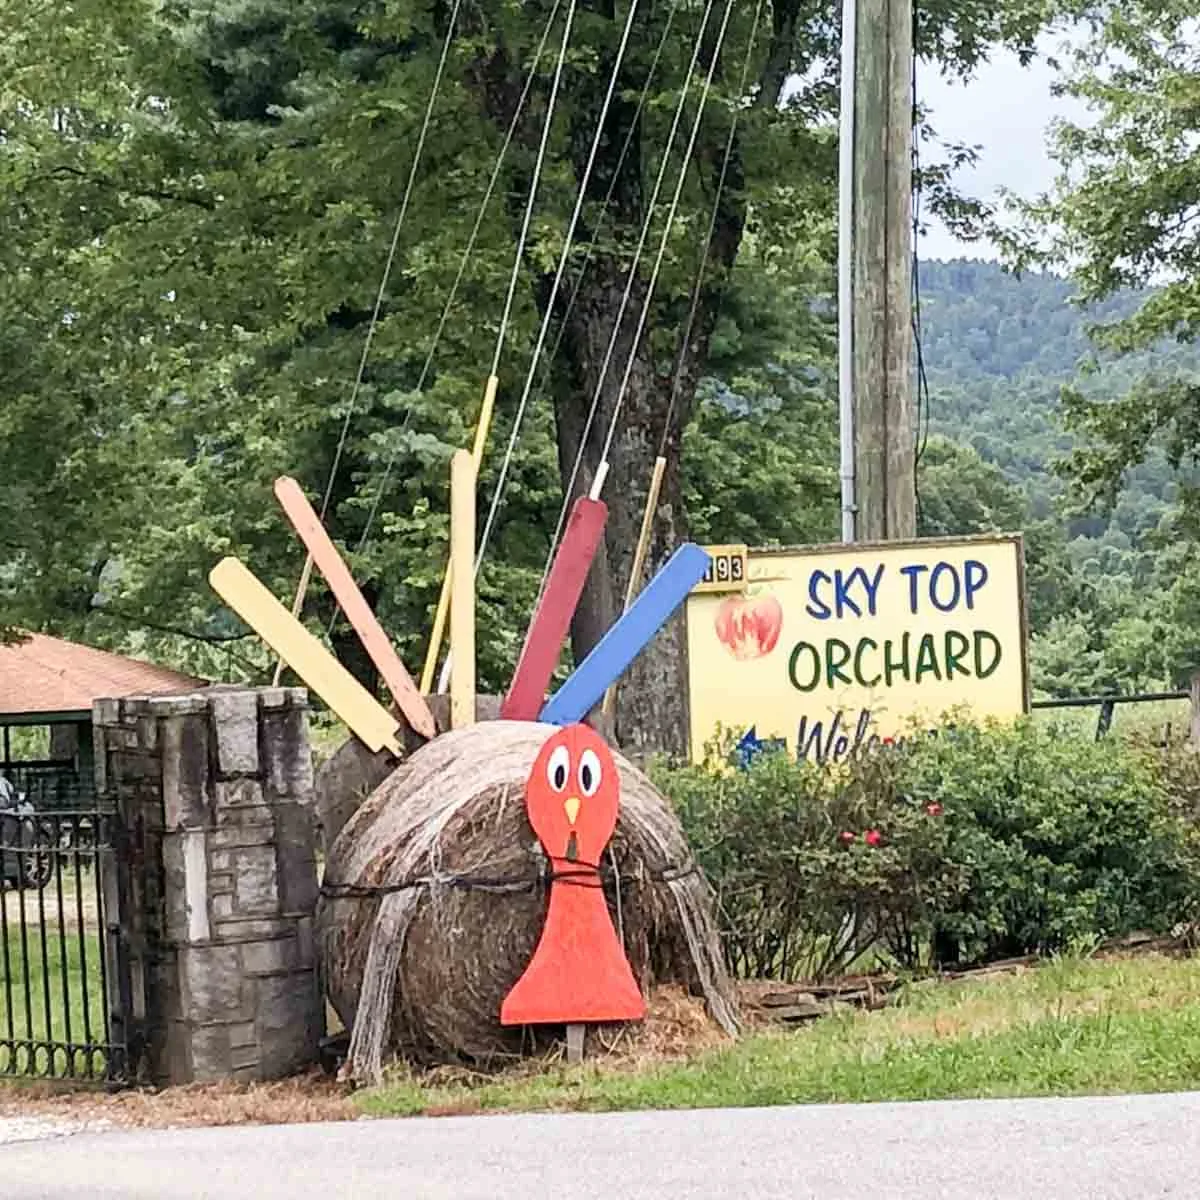 Sky Top Orchard sign